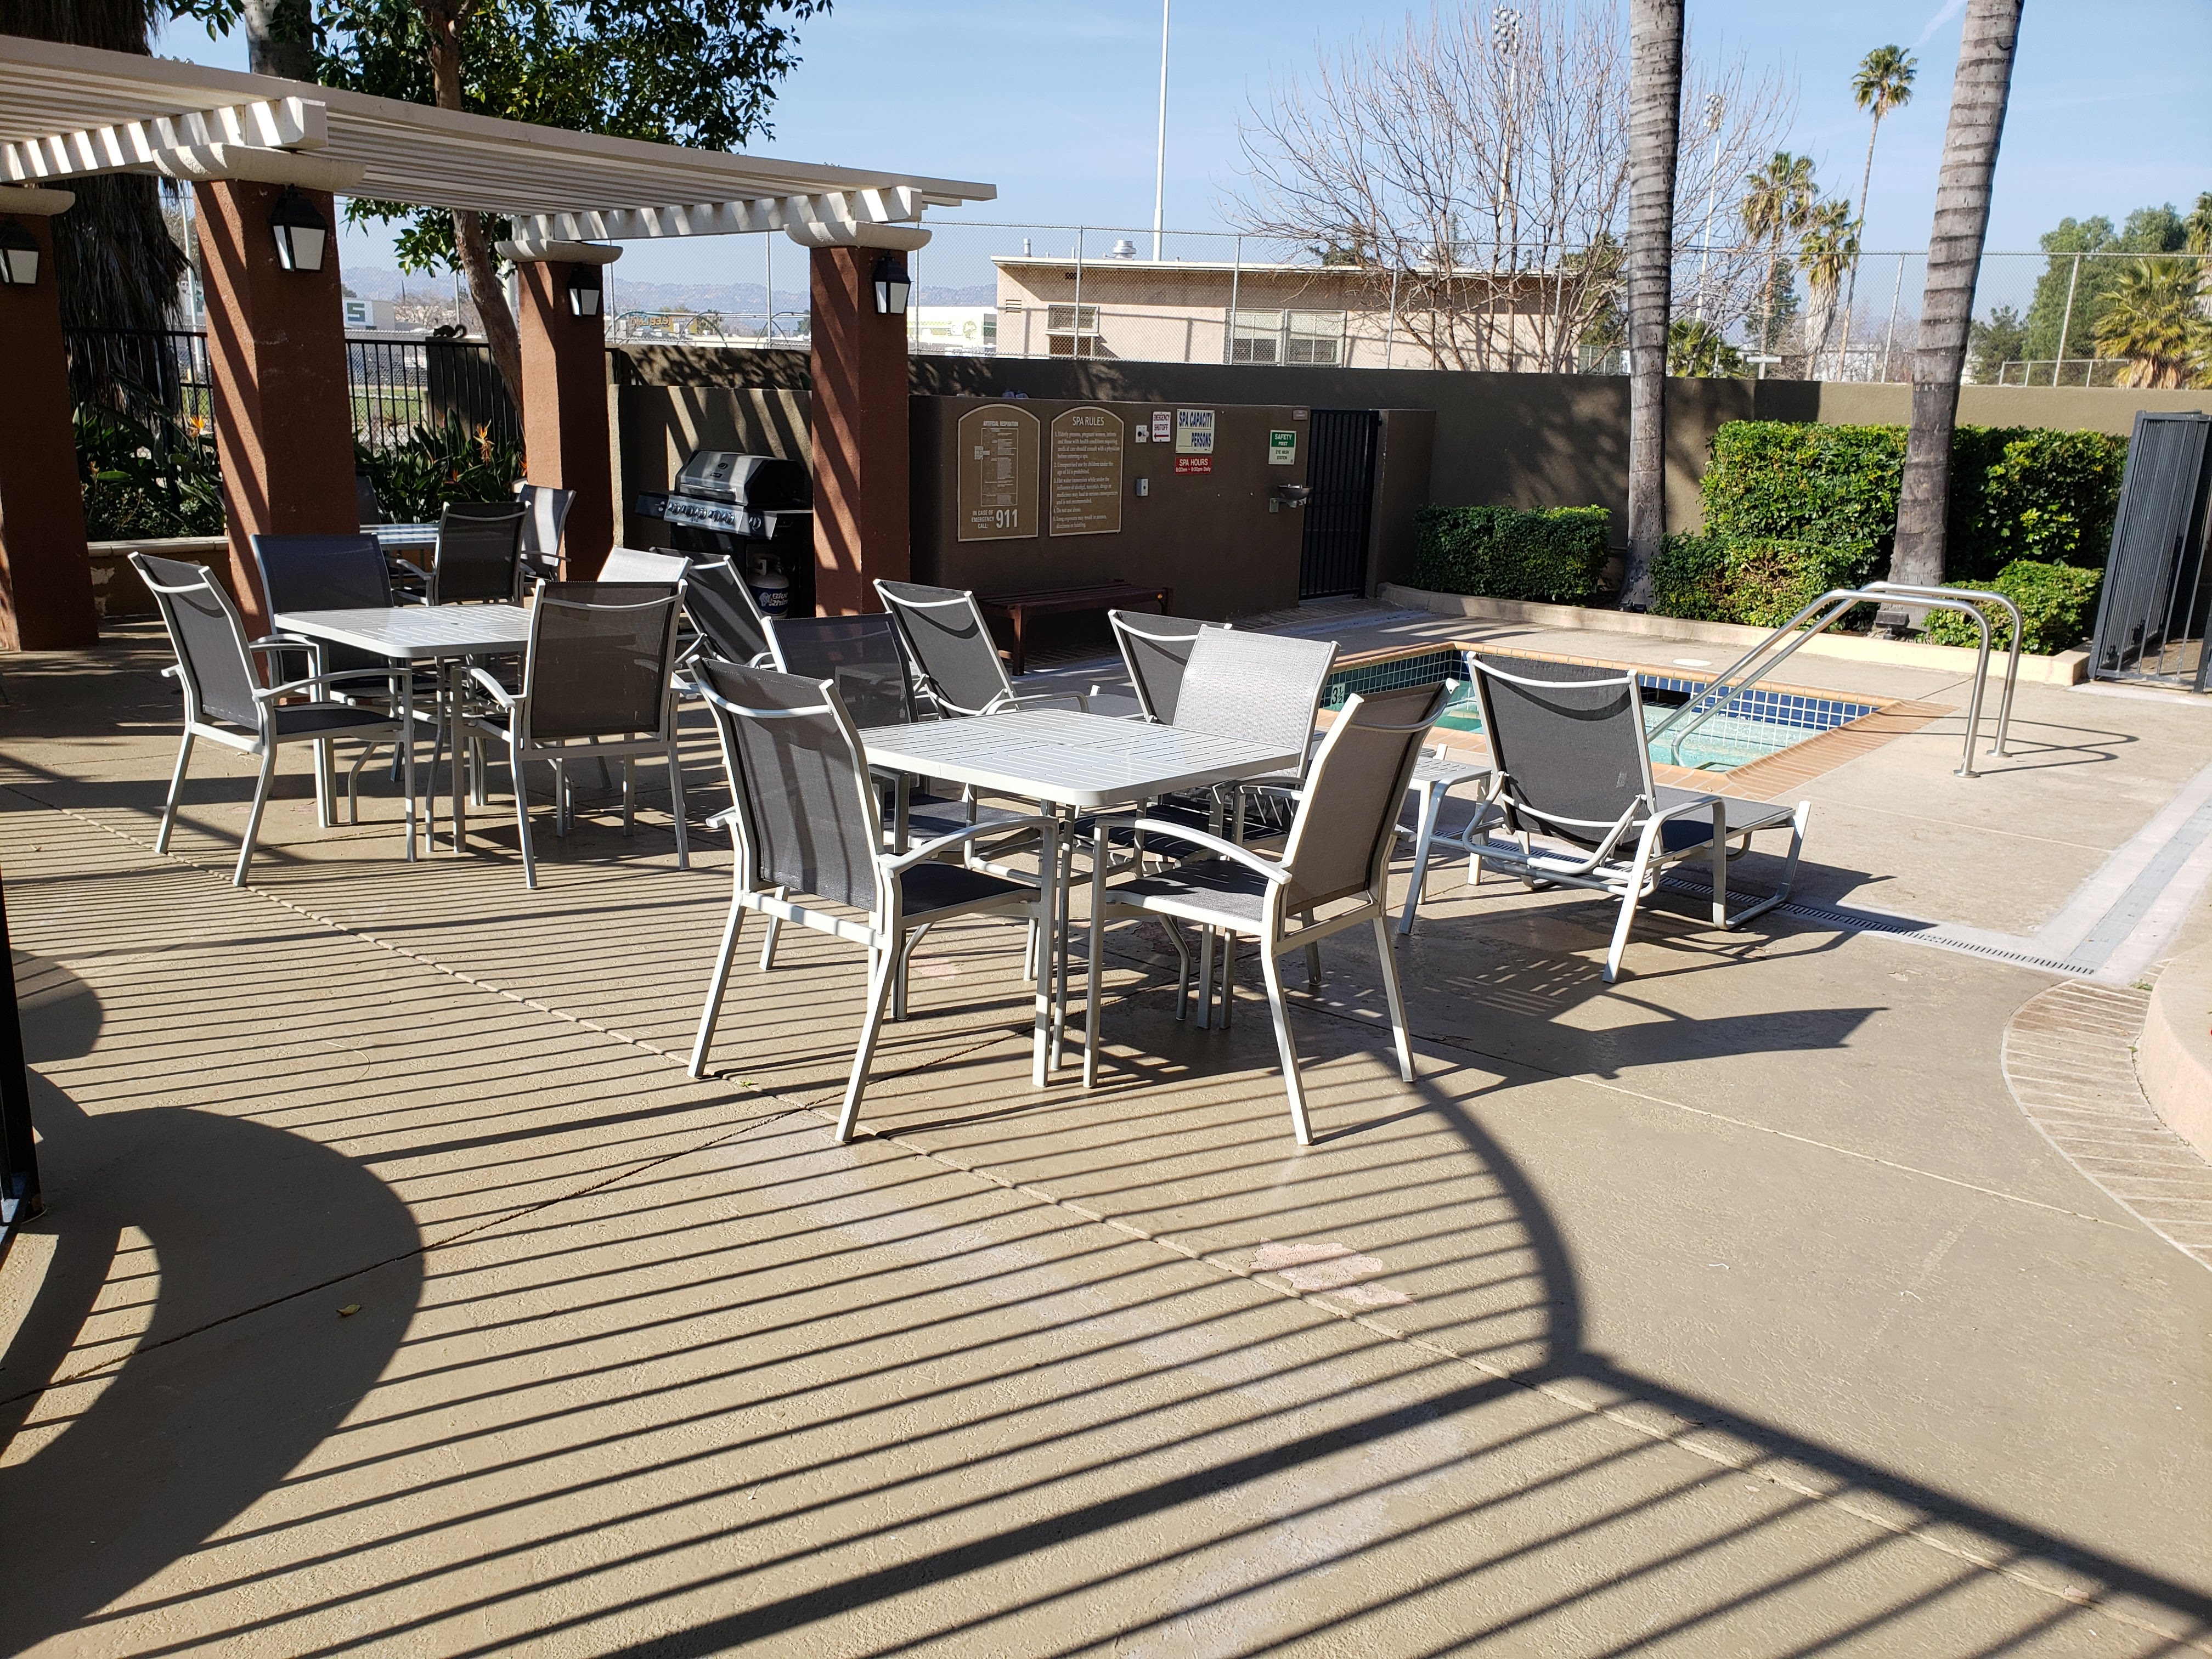 Image of vintage crossing senior apartments outdoor spa area. Are is fenced off. spa located to far right of imgae near bushes and palm trees. Pool shairs next to spa. Behind the pool shairs are patio tables and chairs. bbq grill available under gazebo.